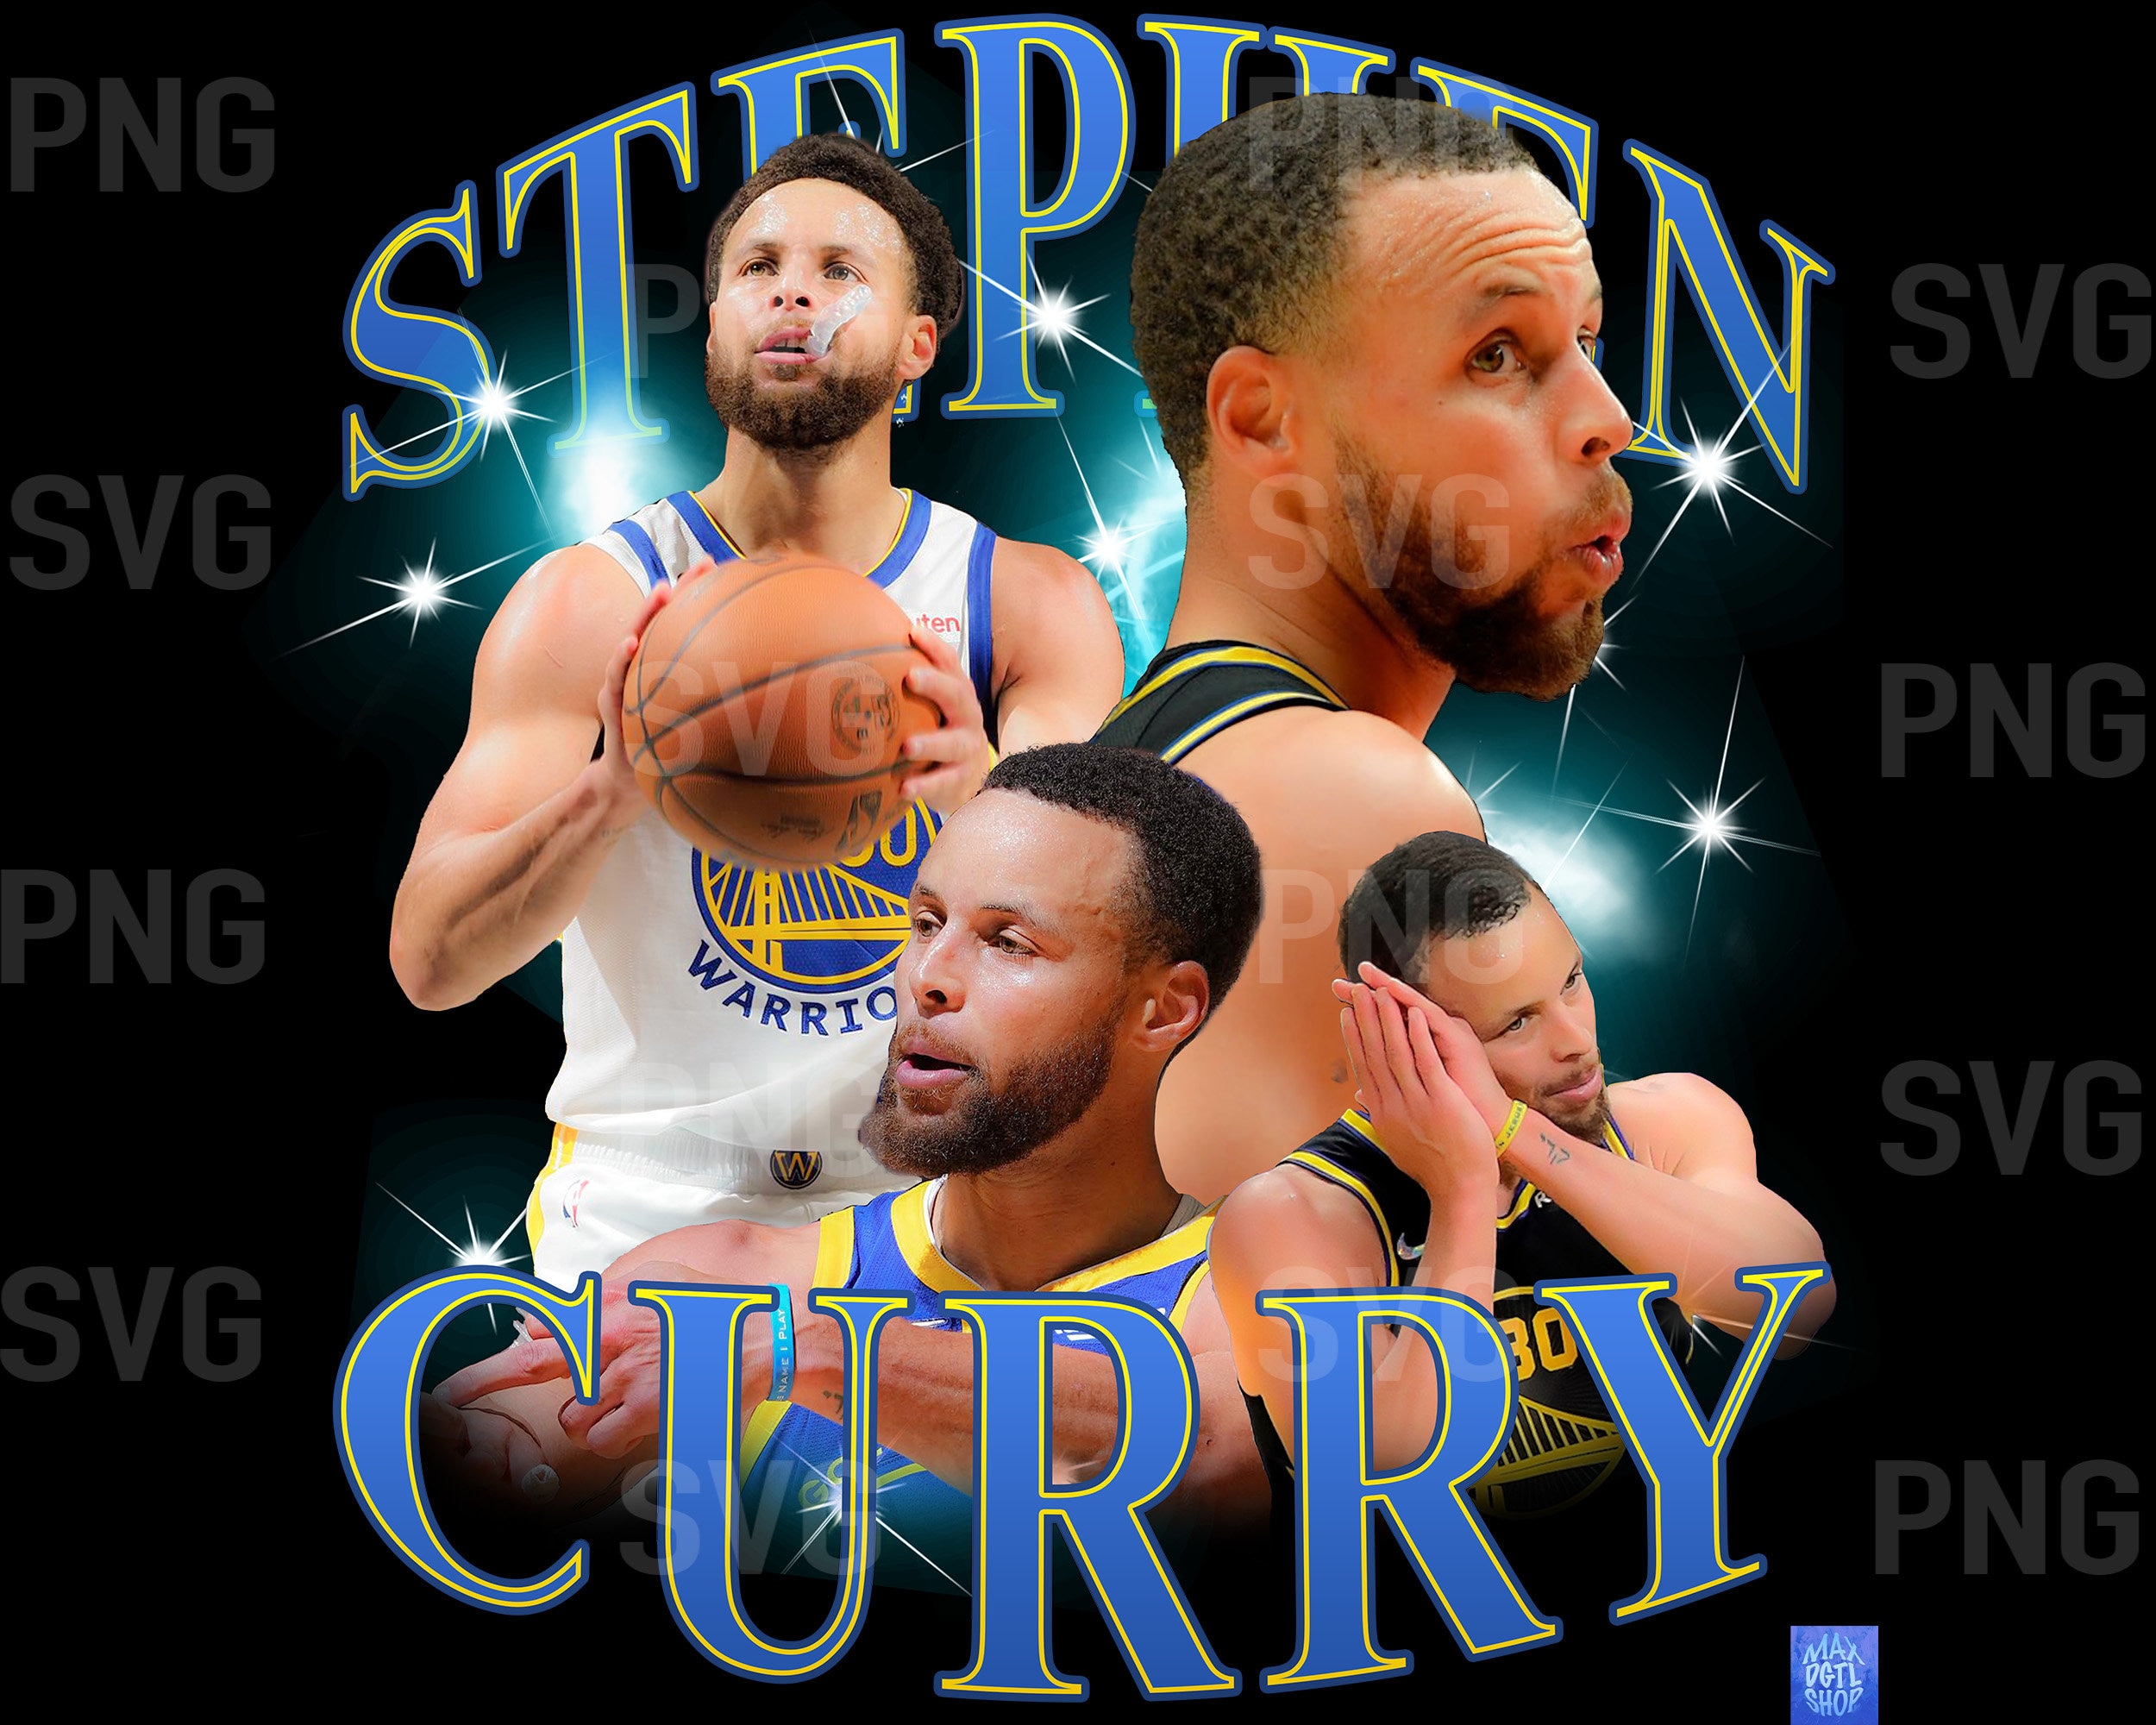 STEPHEN CURRY T Shirt Design. PNG Digital 4500x5100 px. Basketball Retro,  90s Vintage, Bootleg Tee. Instant Download And Ready To Print.